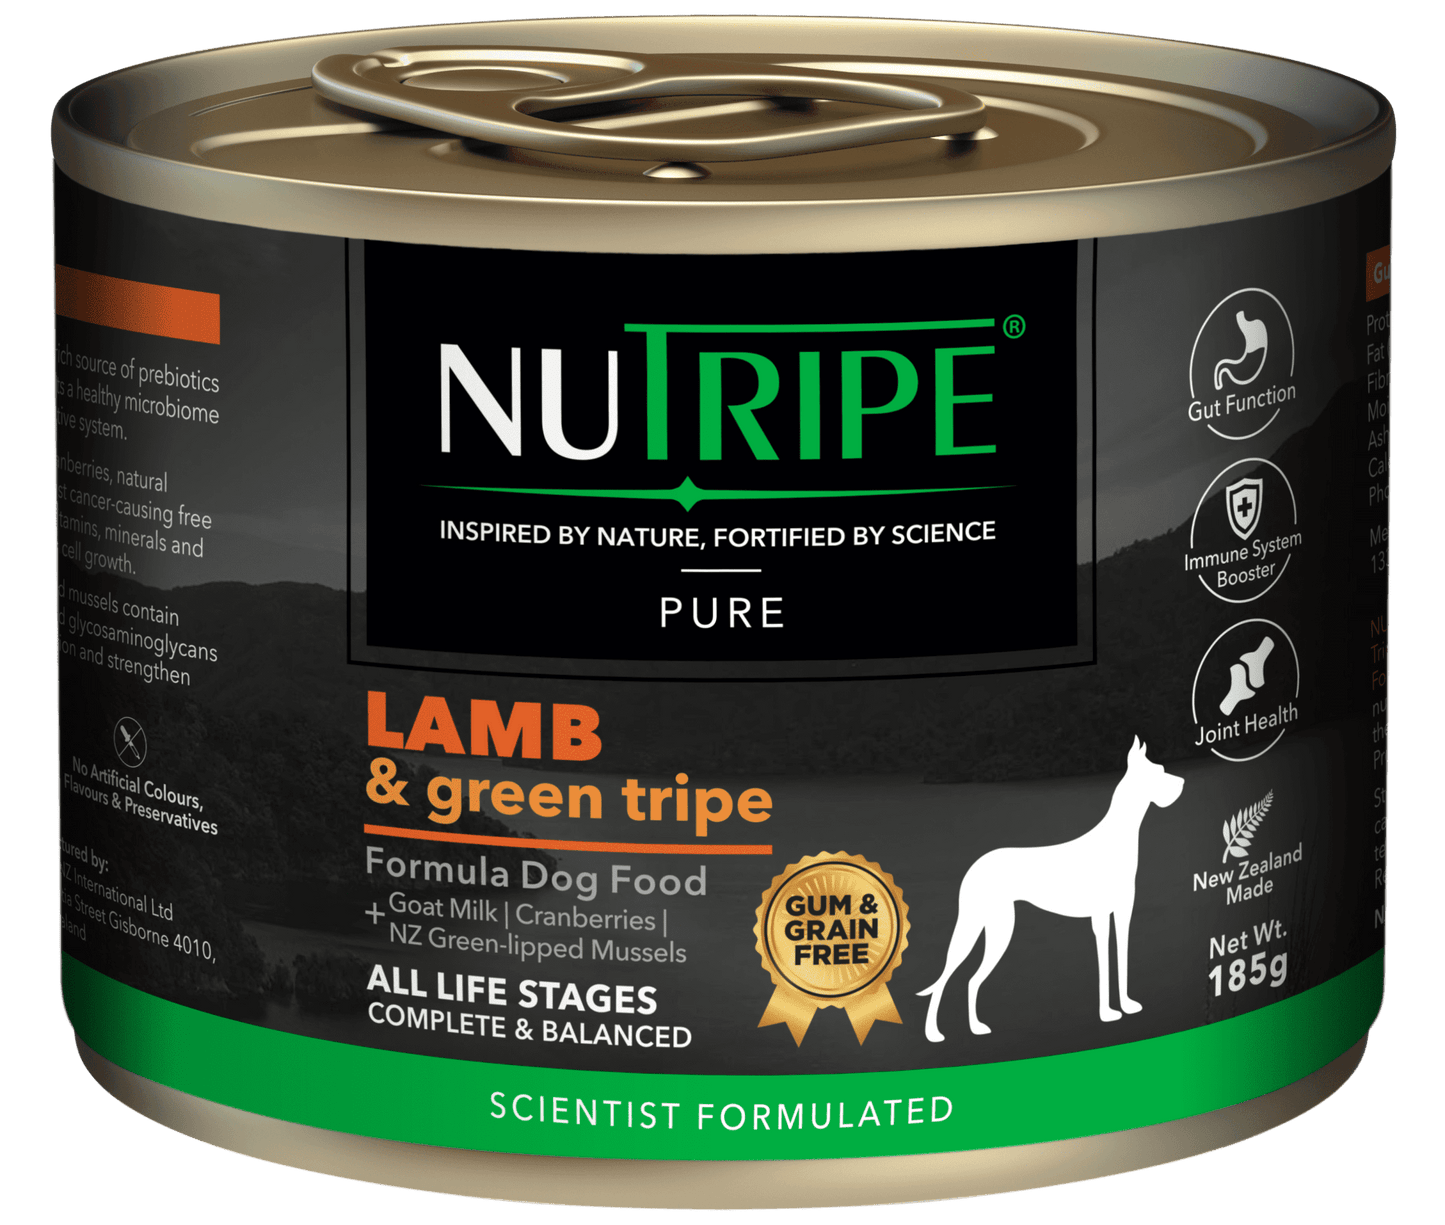 Your Whole Dog’s NUTRIPE PURE Lamb & Green Tripe Dog Food (185g cans).